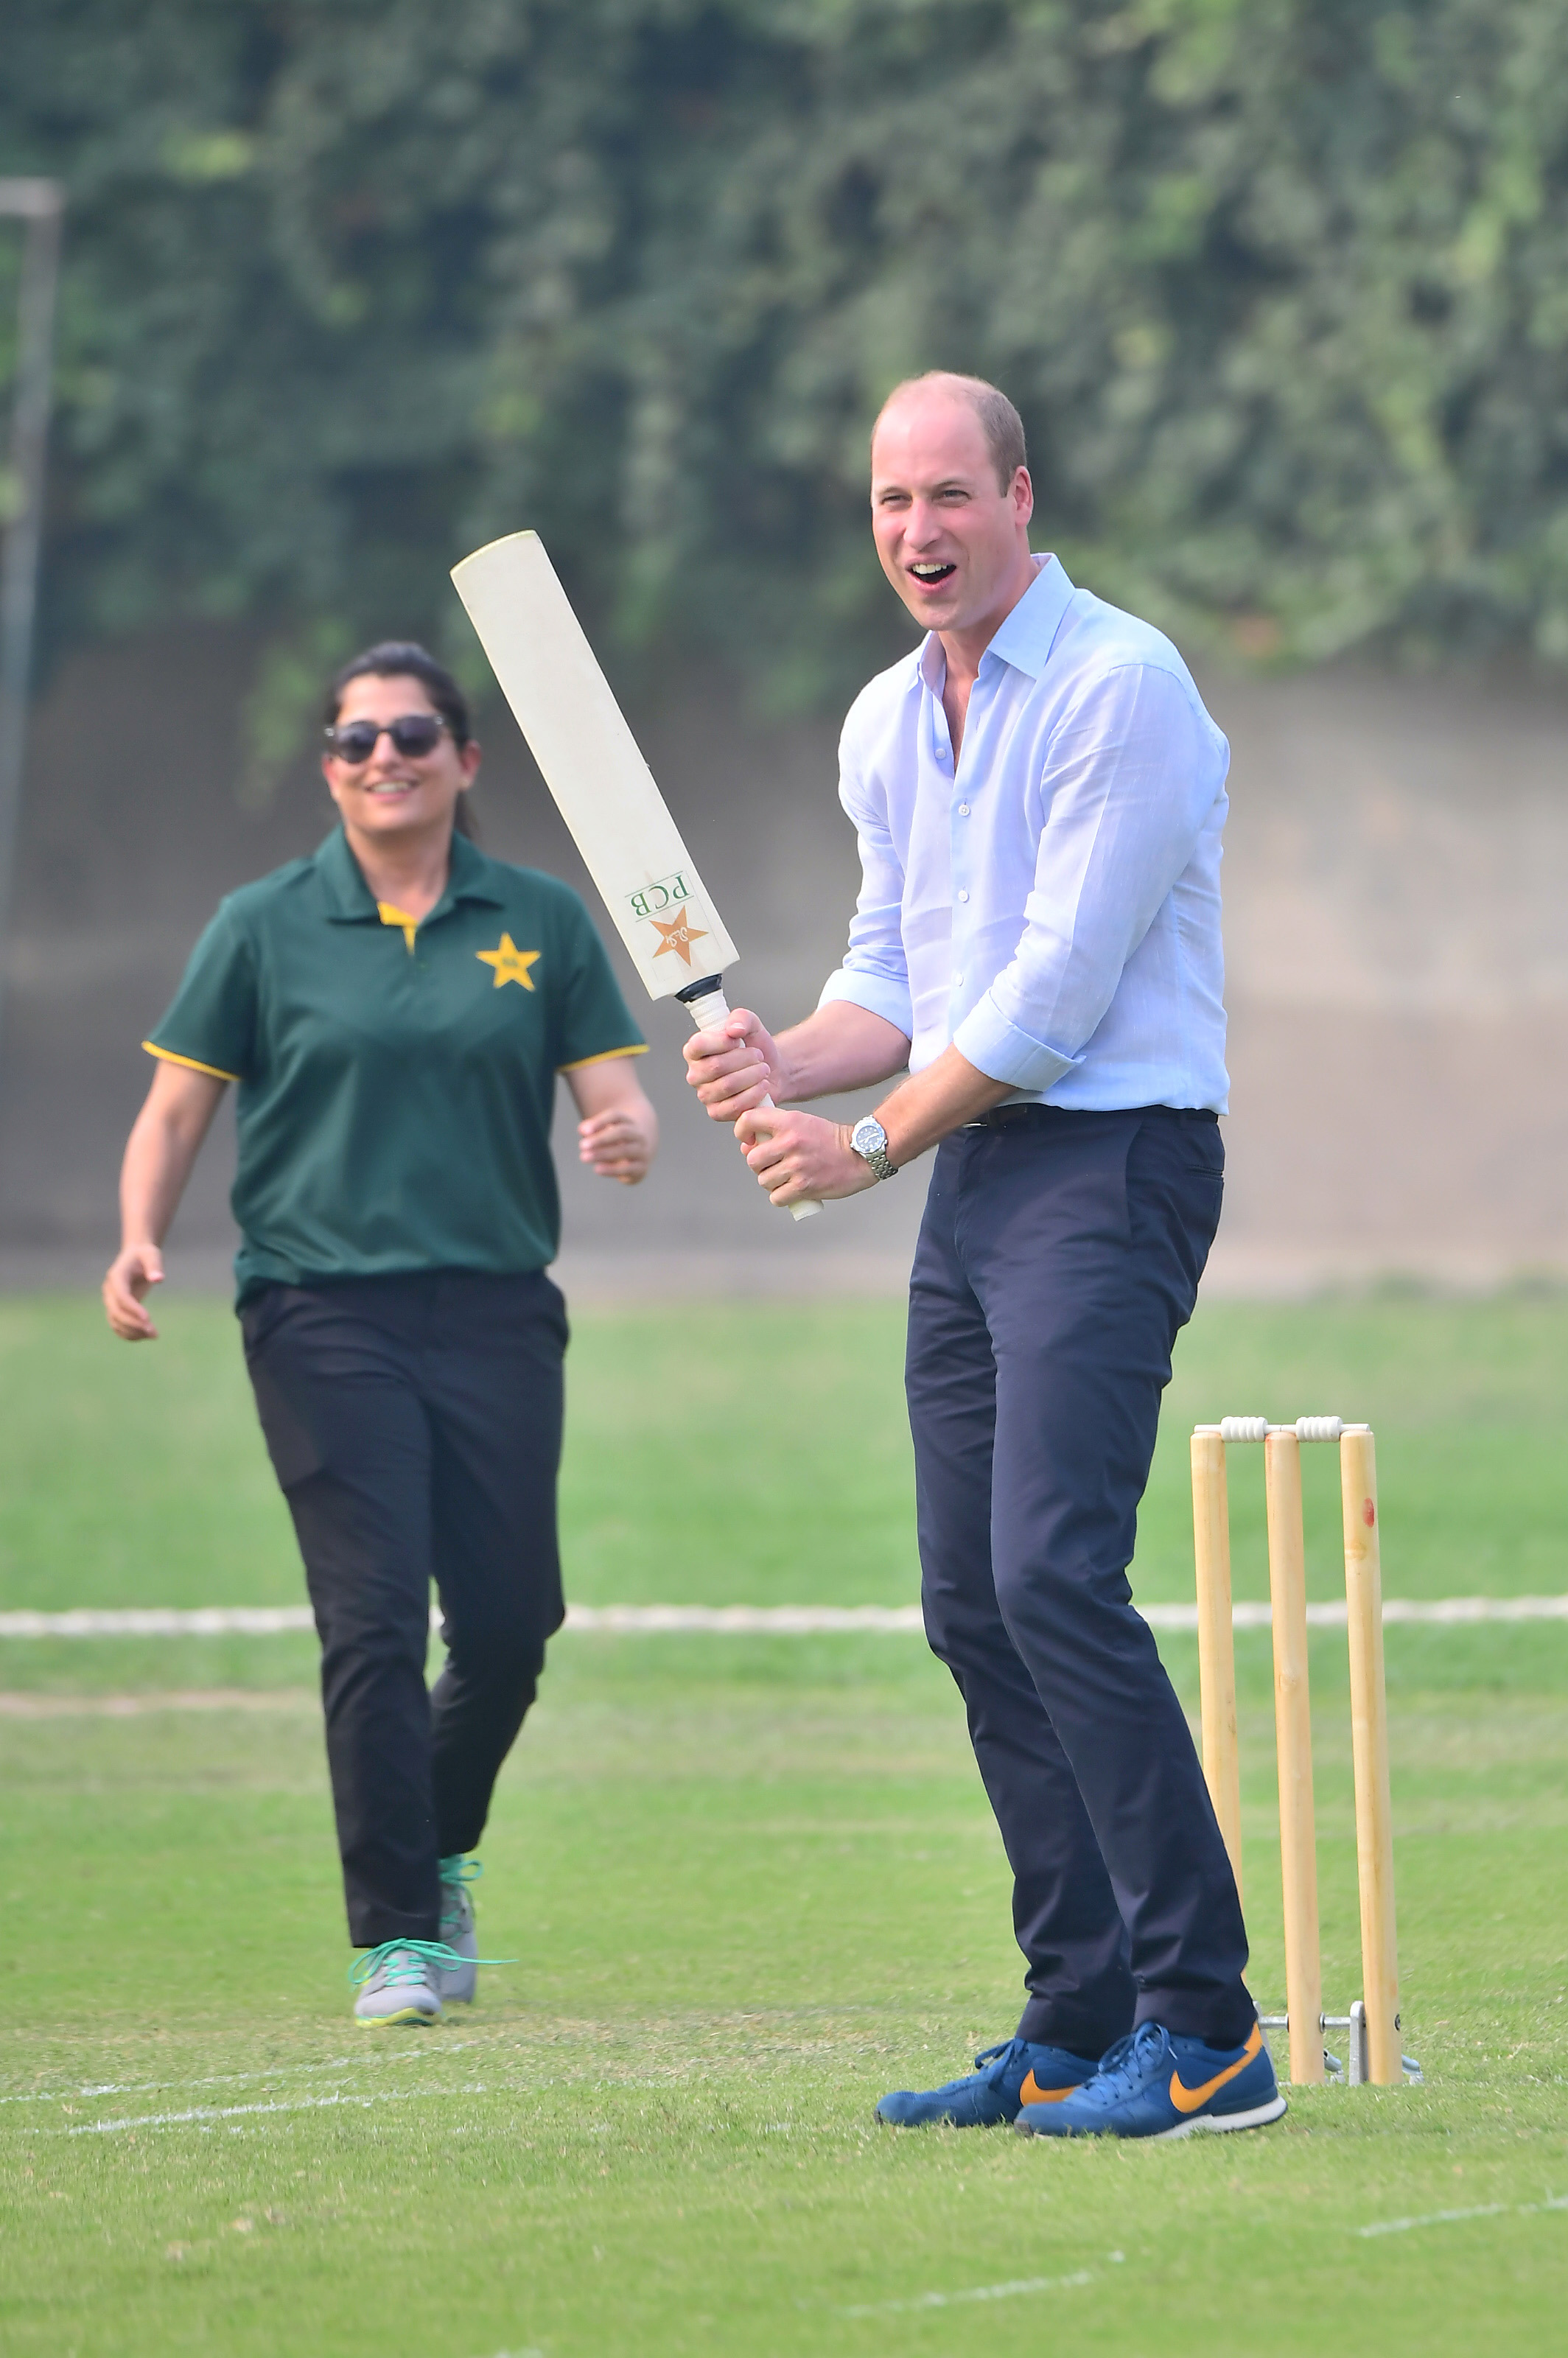 Prince William, Duke of Cambridge plays a round of cricket during a visit of the National Cricket Academy with Catherine, Duchess of Cambridge in Lahore, Pakistan. Photo: Samir Hussein/WireImage/Getty Images